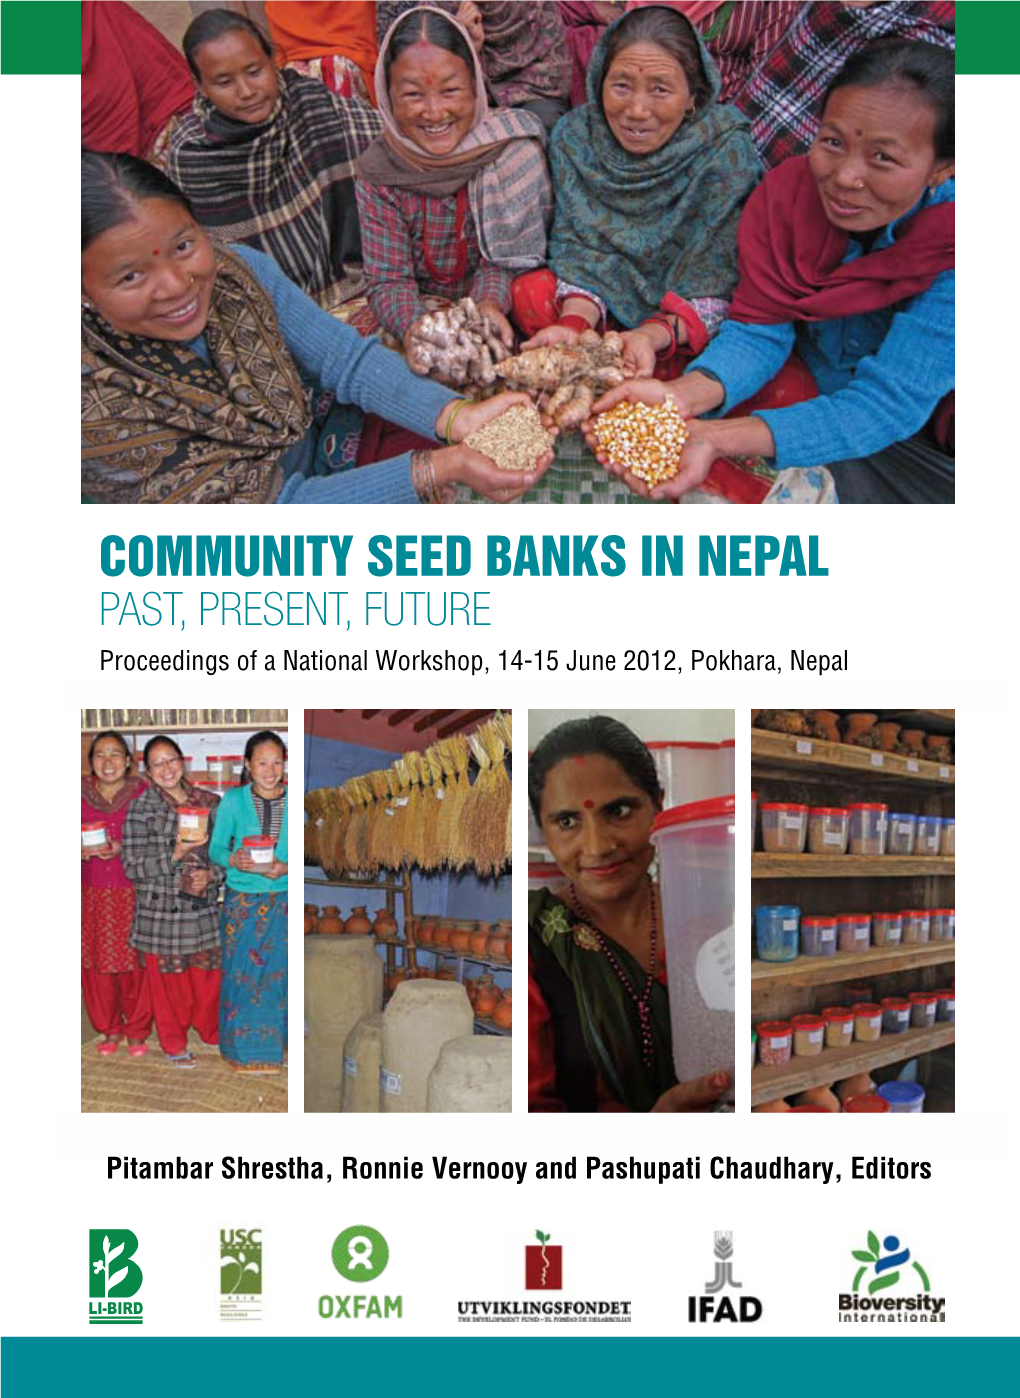 Community Seed Banks in Nepal Past, Present, Future Proceedings of a National Workshop, 14-15 June 2012, Pokhara, Nepal